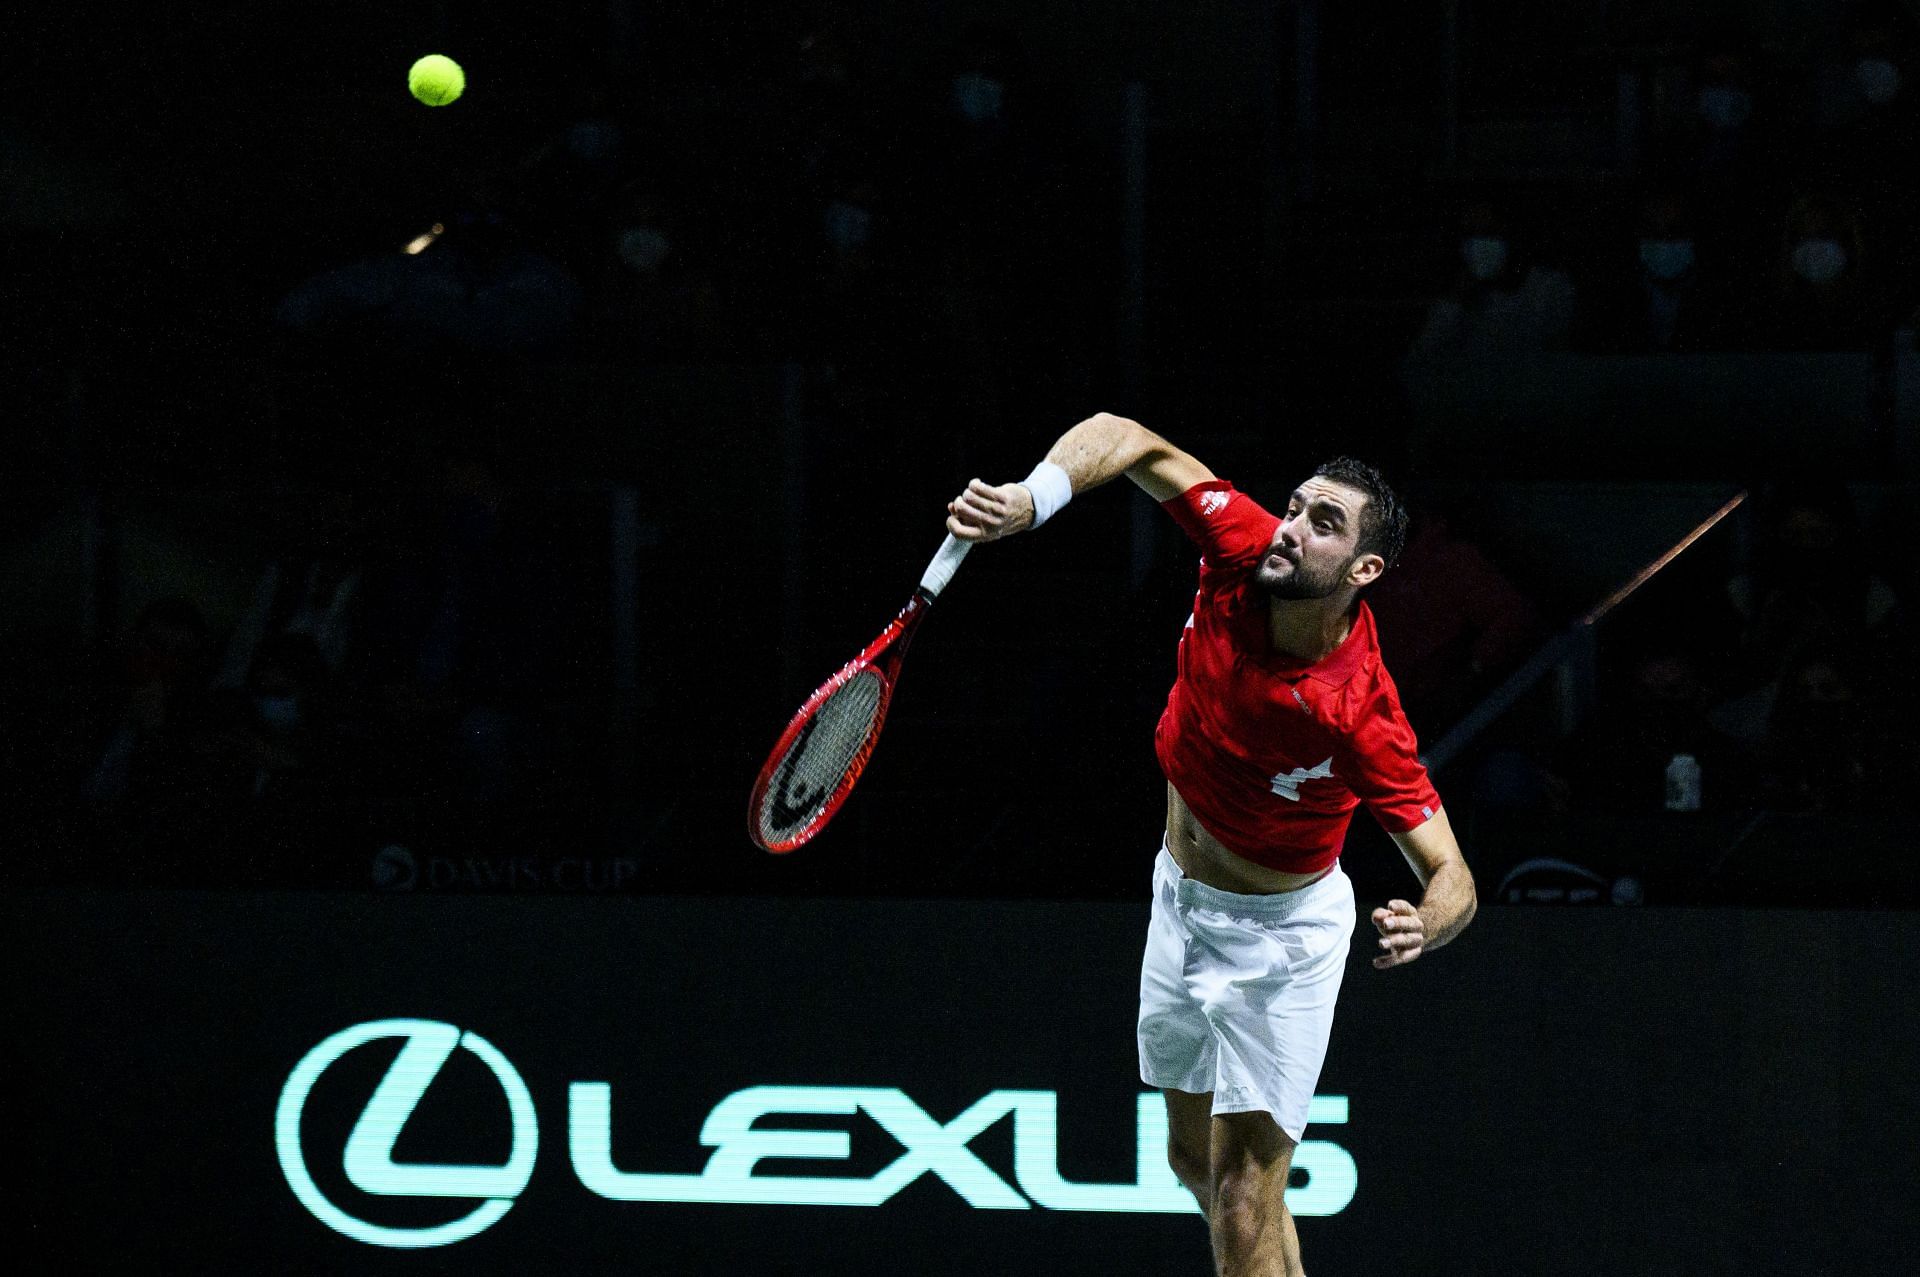 Marin Cilic is among the favorites to win the tournament